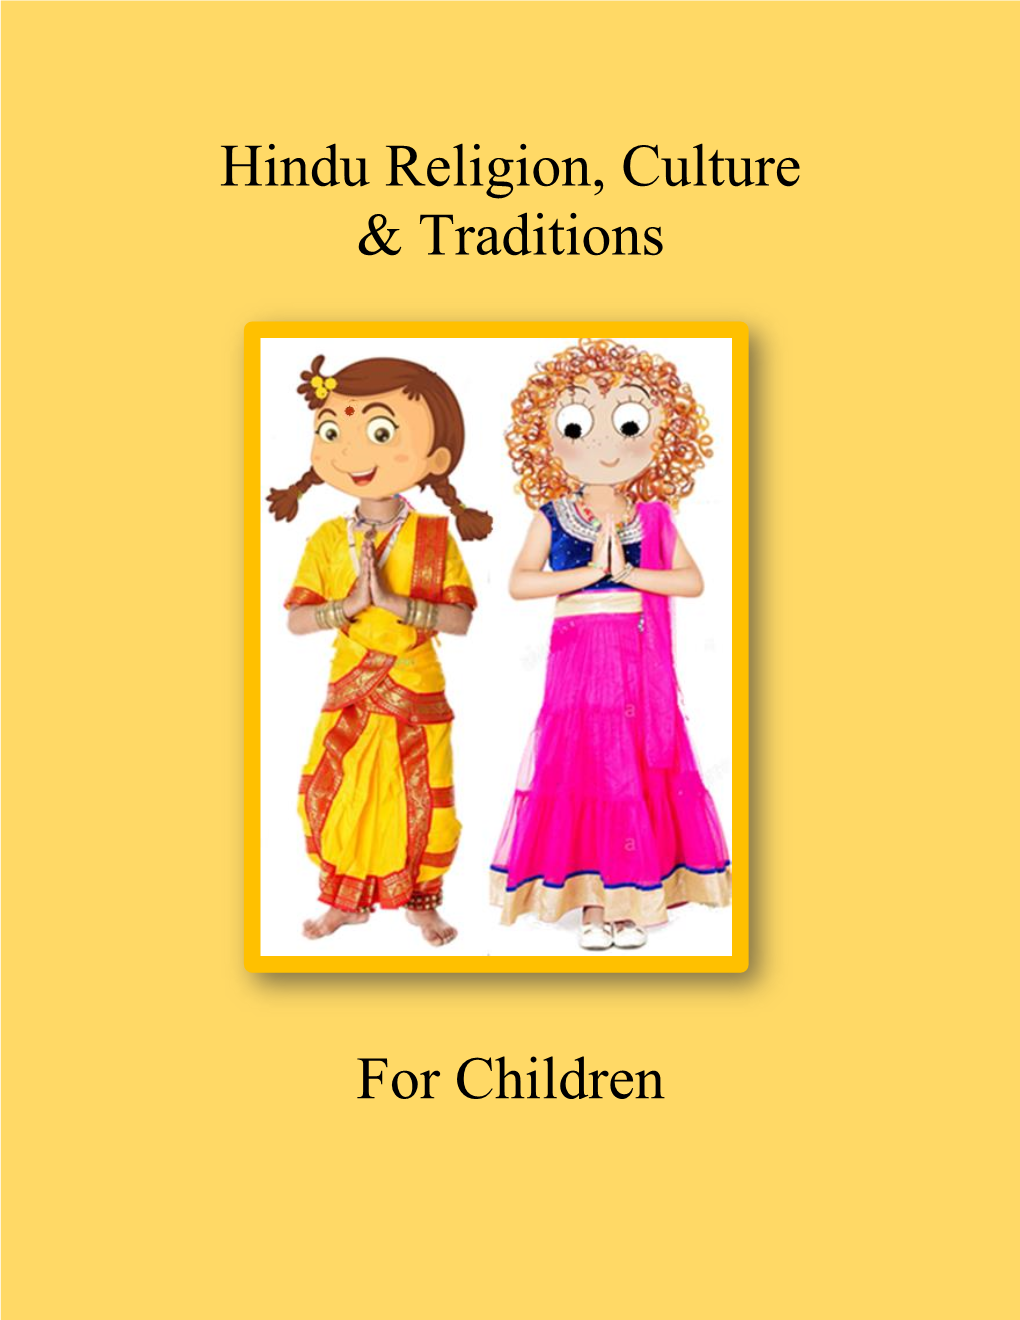 Hindu Religion, Culture & Traditions for Children